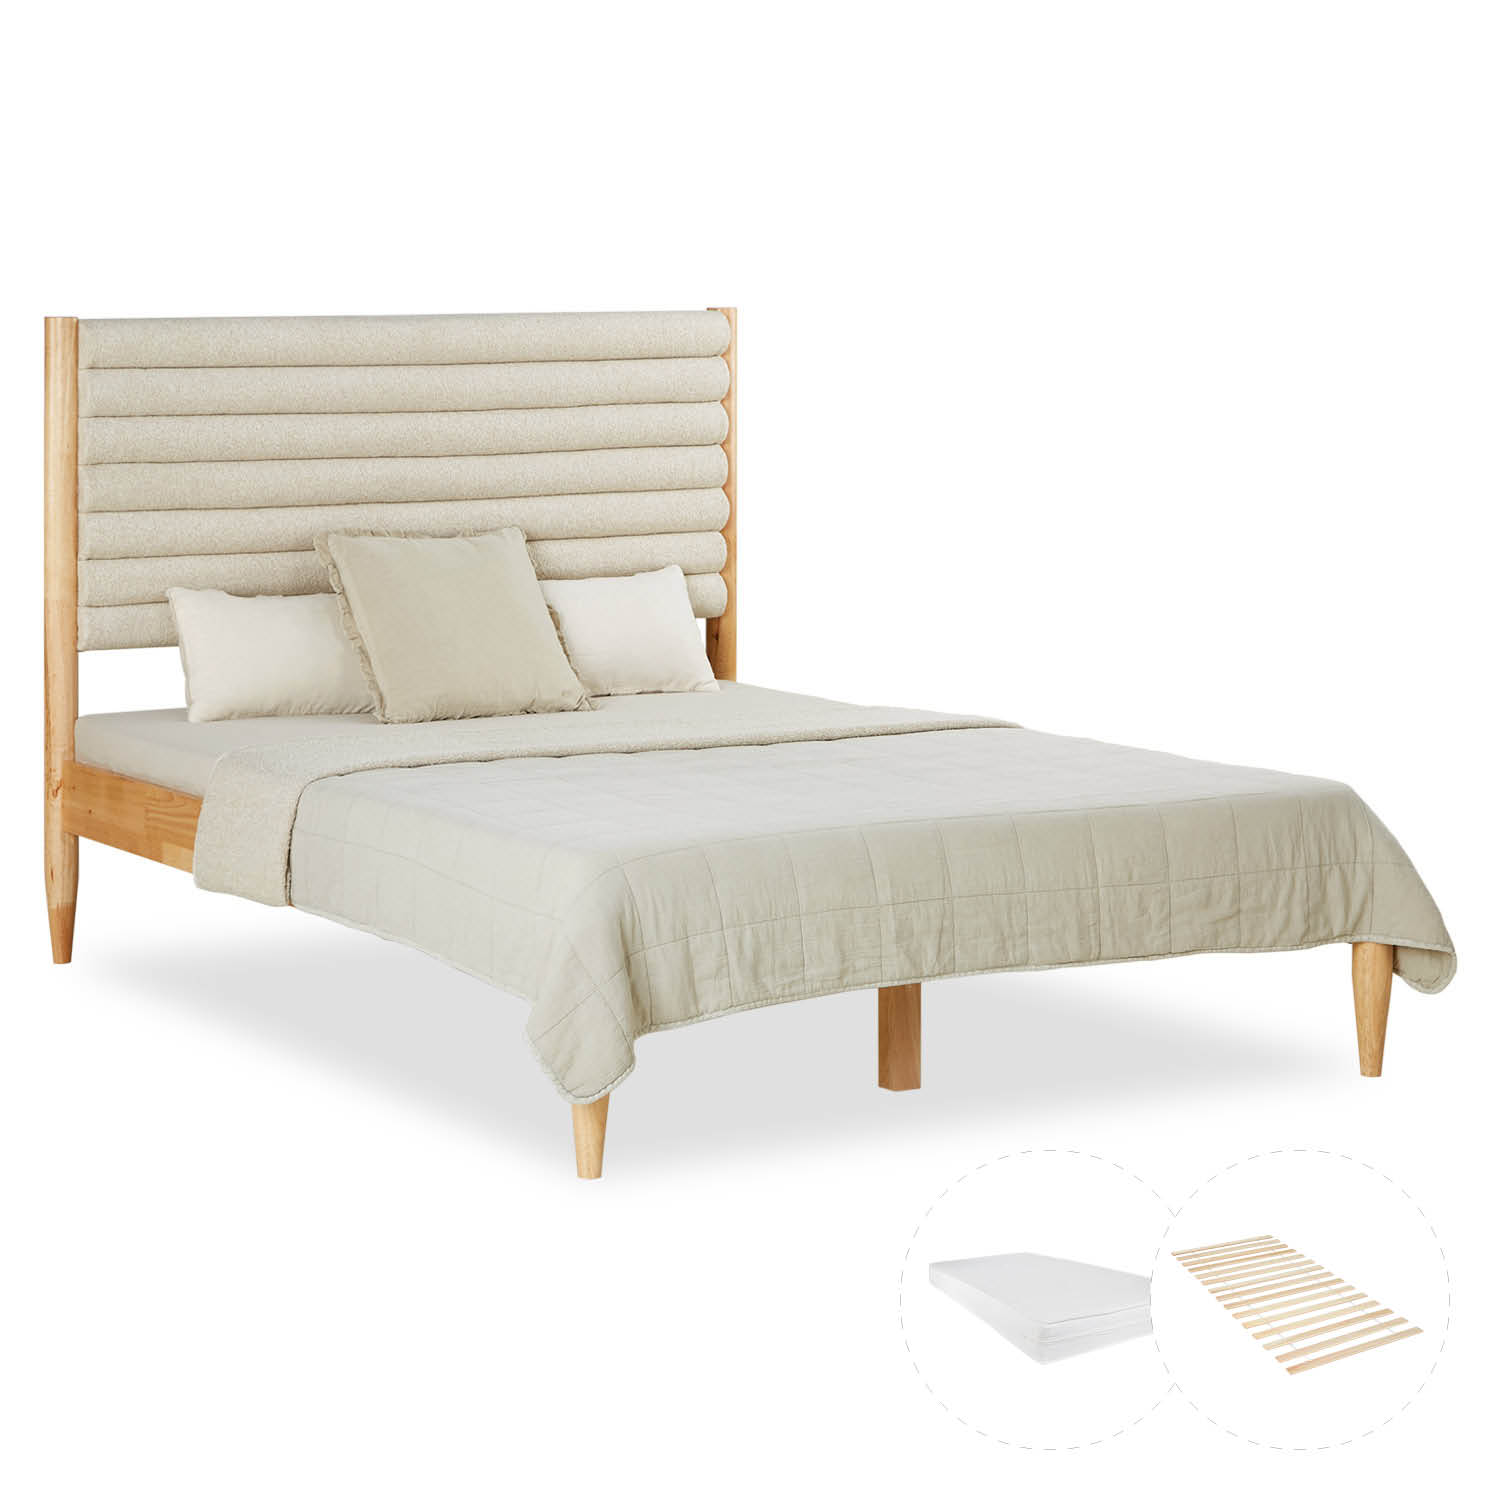 Small Double Bed 140x200 cm with Mattress Wooden Bed Bouclé Beige Upholstered Bed with Slatted Frame Fabric Bed Frame